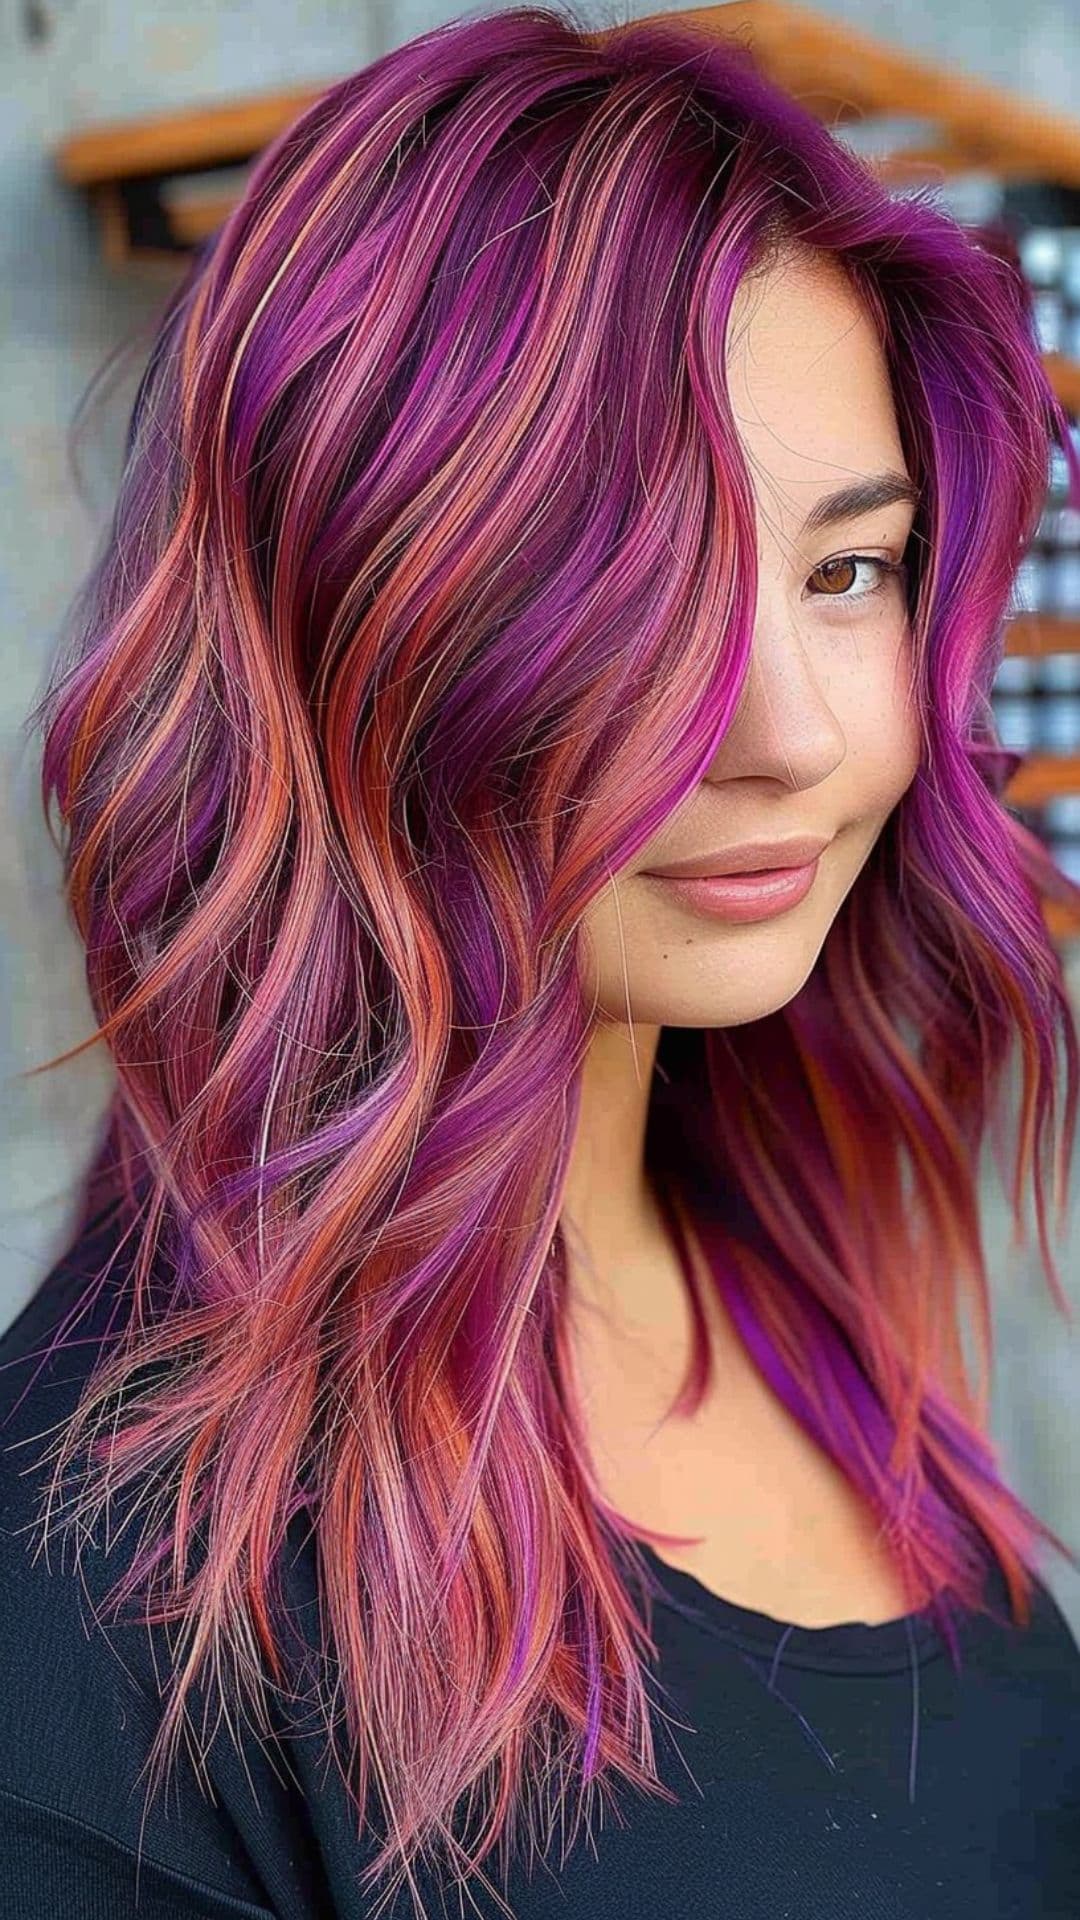 A woman modelling a tropical punch purple hair color.